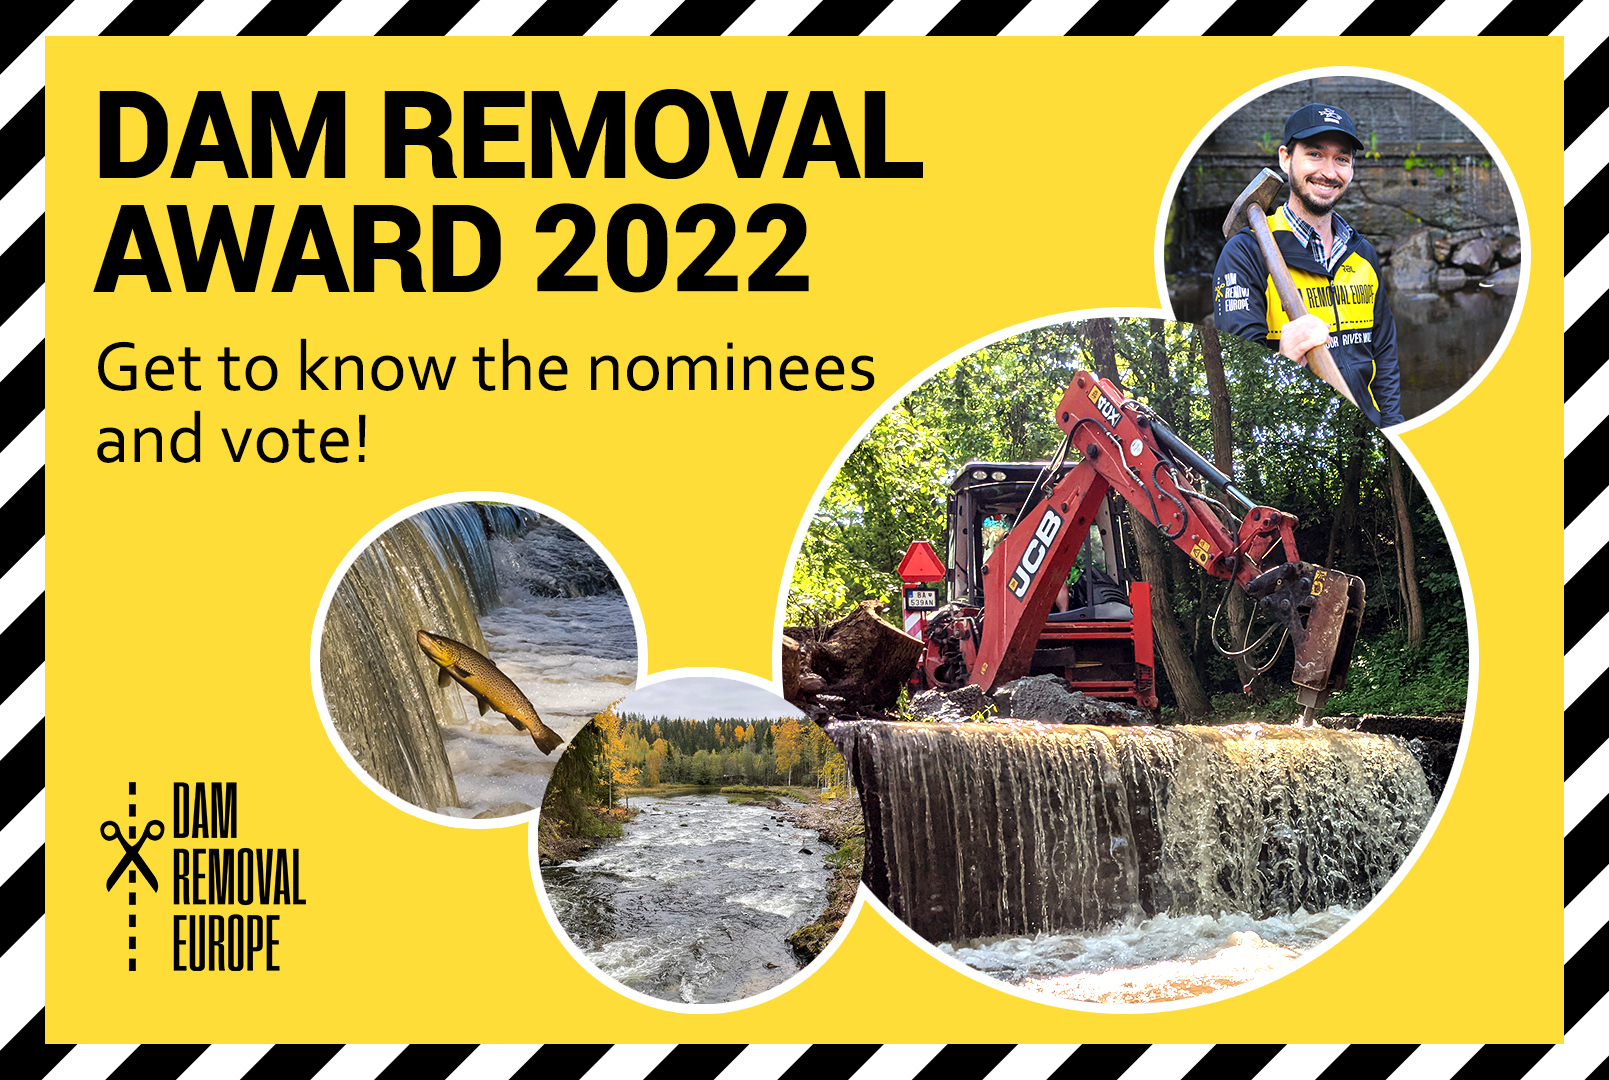 The Dam Removal Europe Award 2022 goes to…